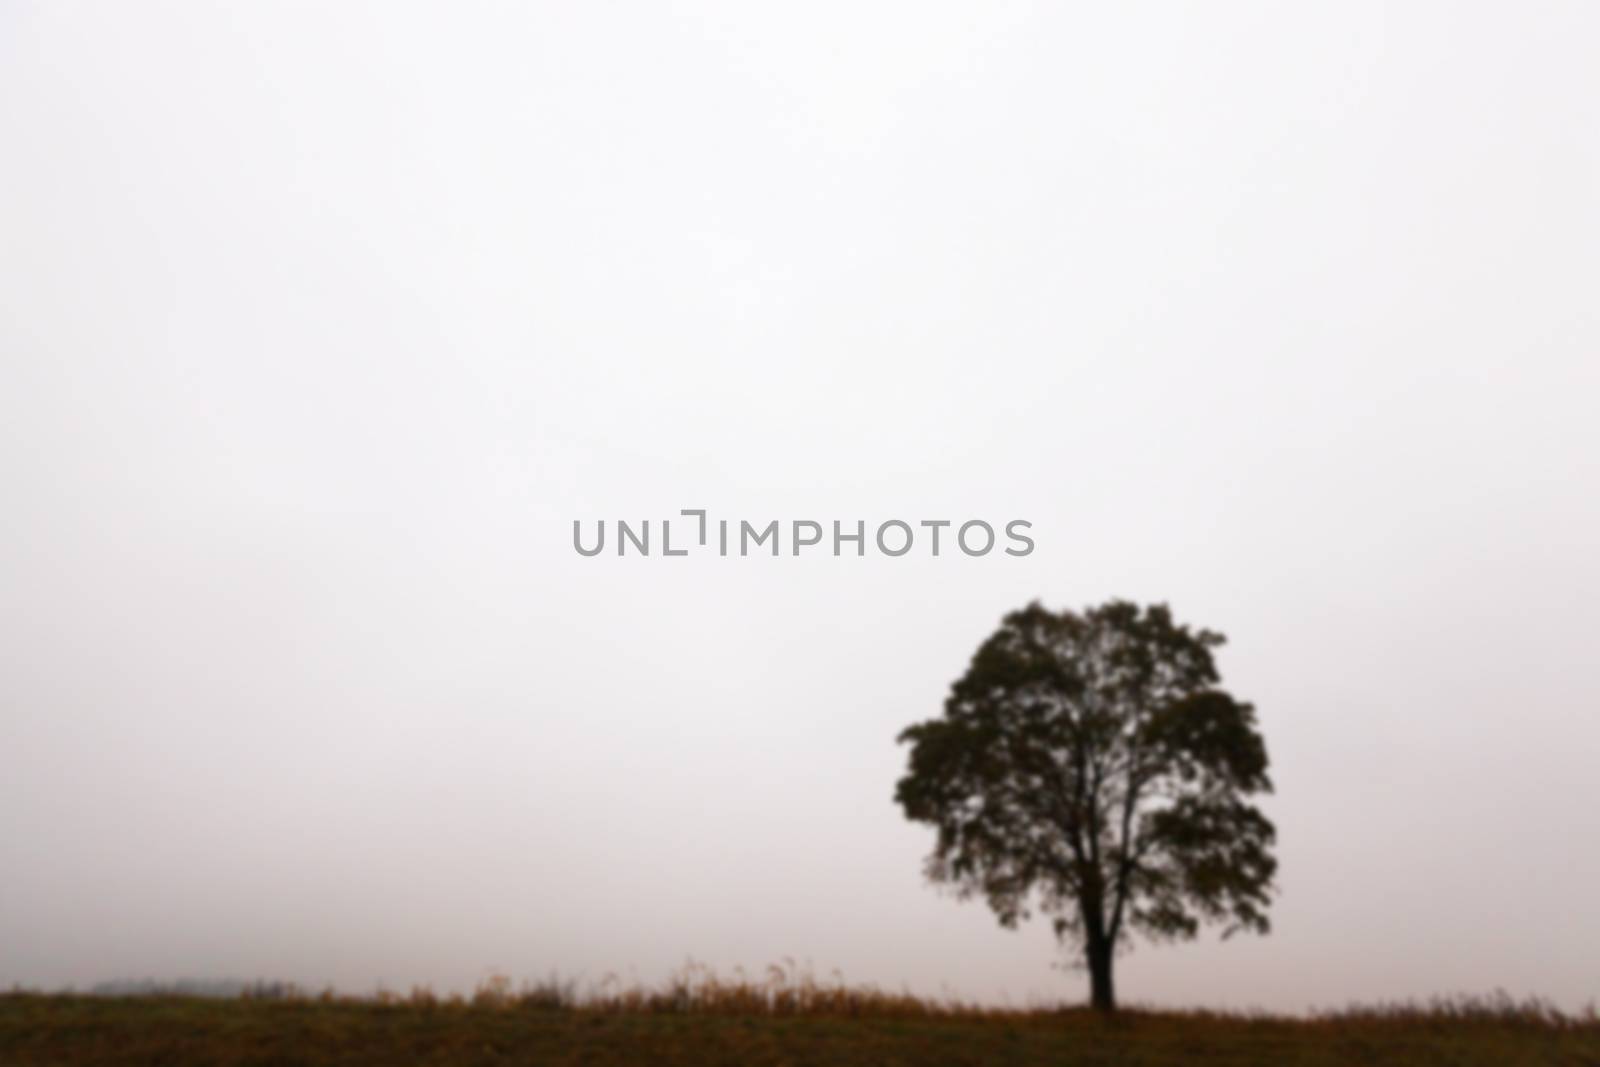 photographed close-up of a tree growing in the field, autumn season, the silhouette of the tree's photos are out of focus - defocus,